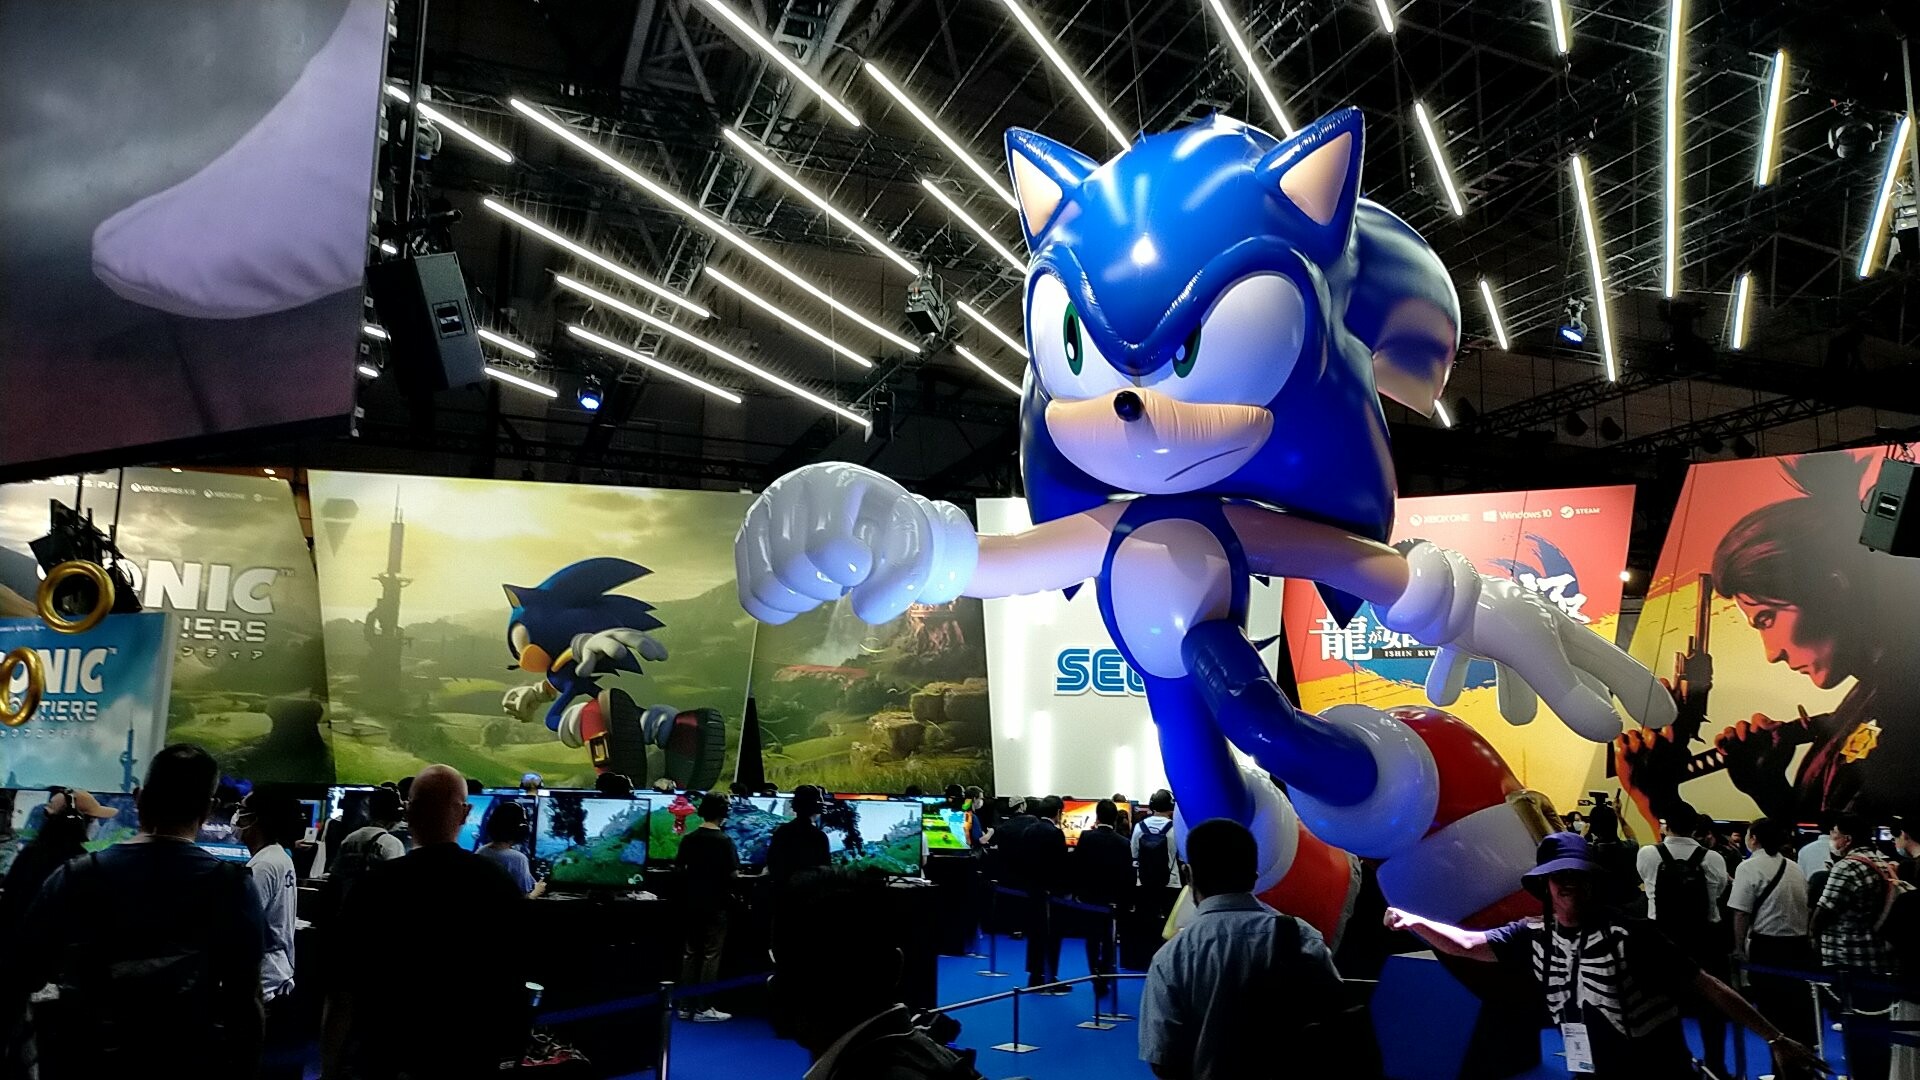 Sonic Frontiers Showcases Live Gameplay at TGS 2022 - QooApp News